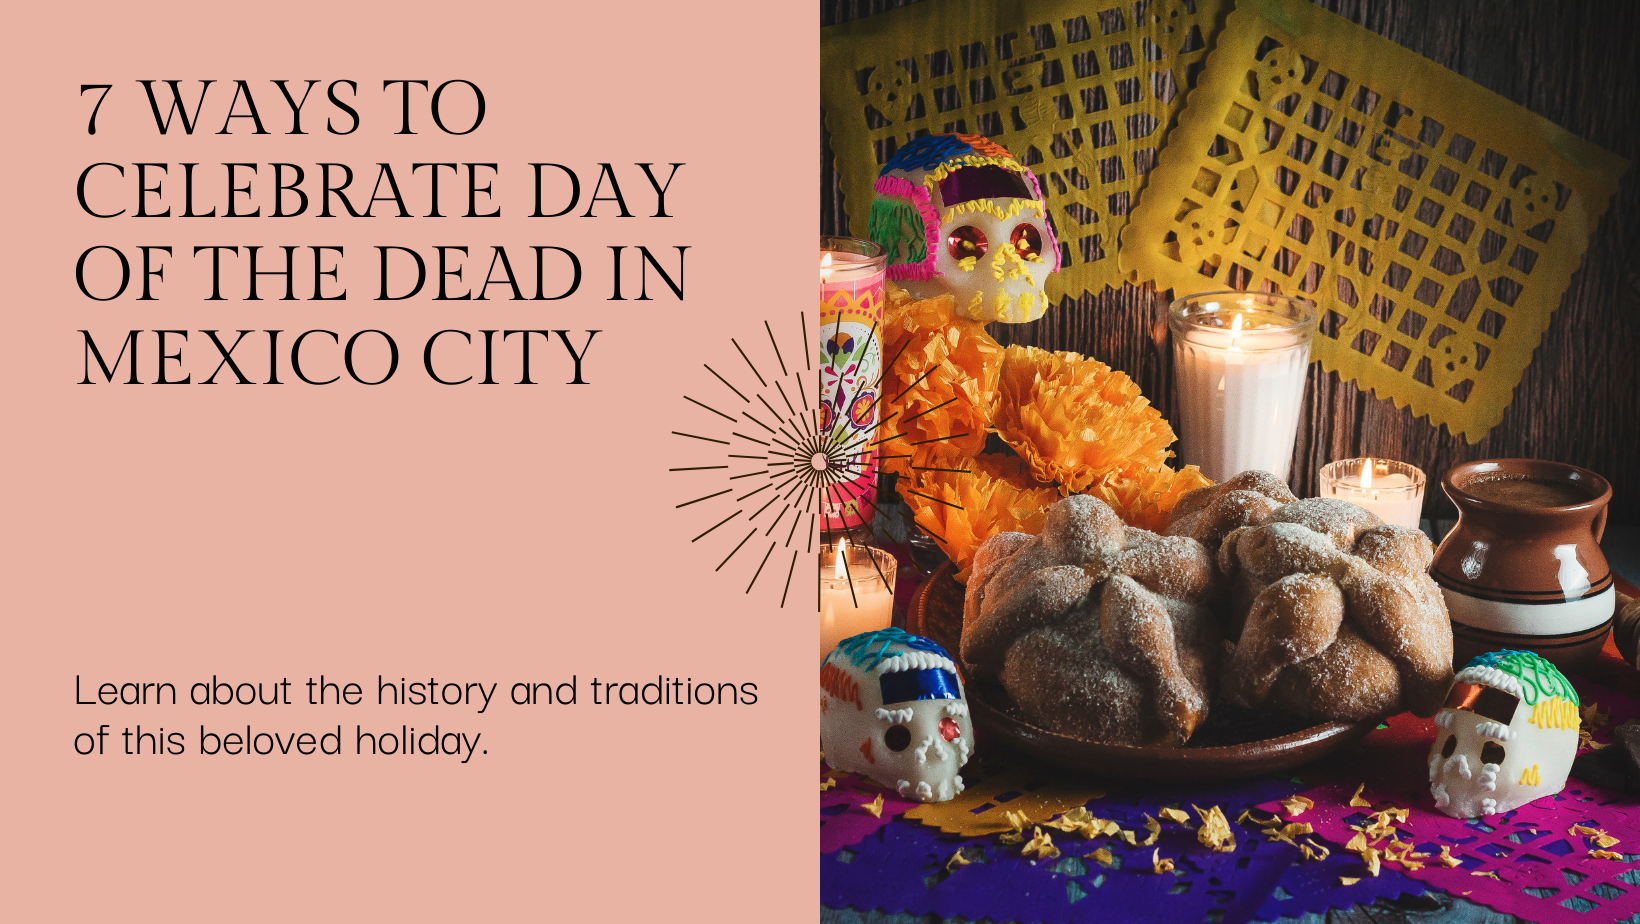 7 Ways to Celebrate Day of the Dead in Mexico City